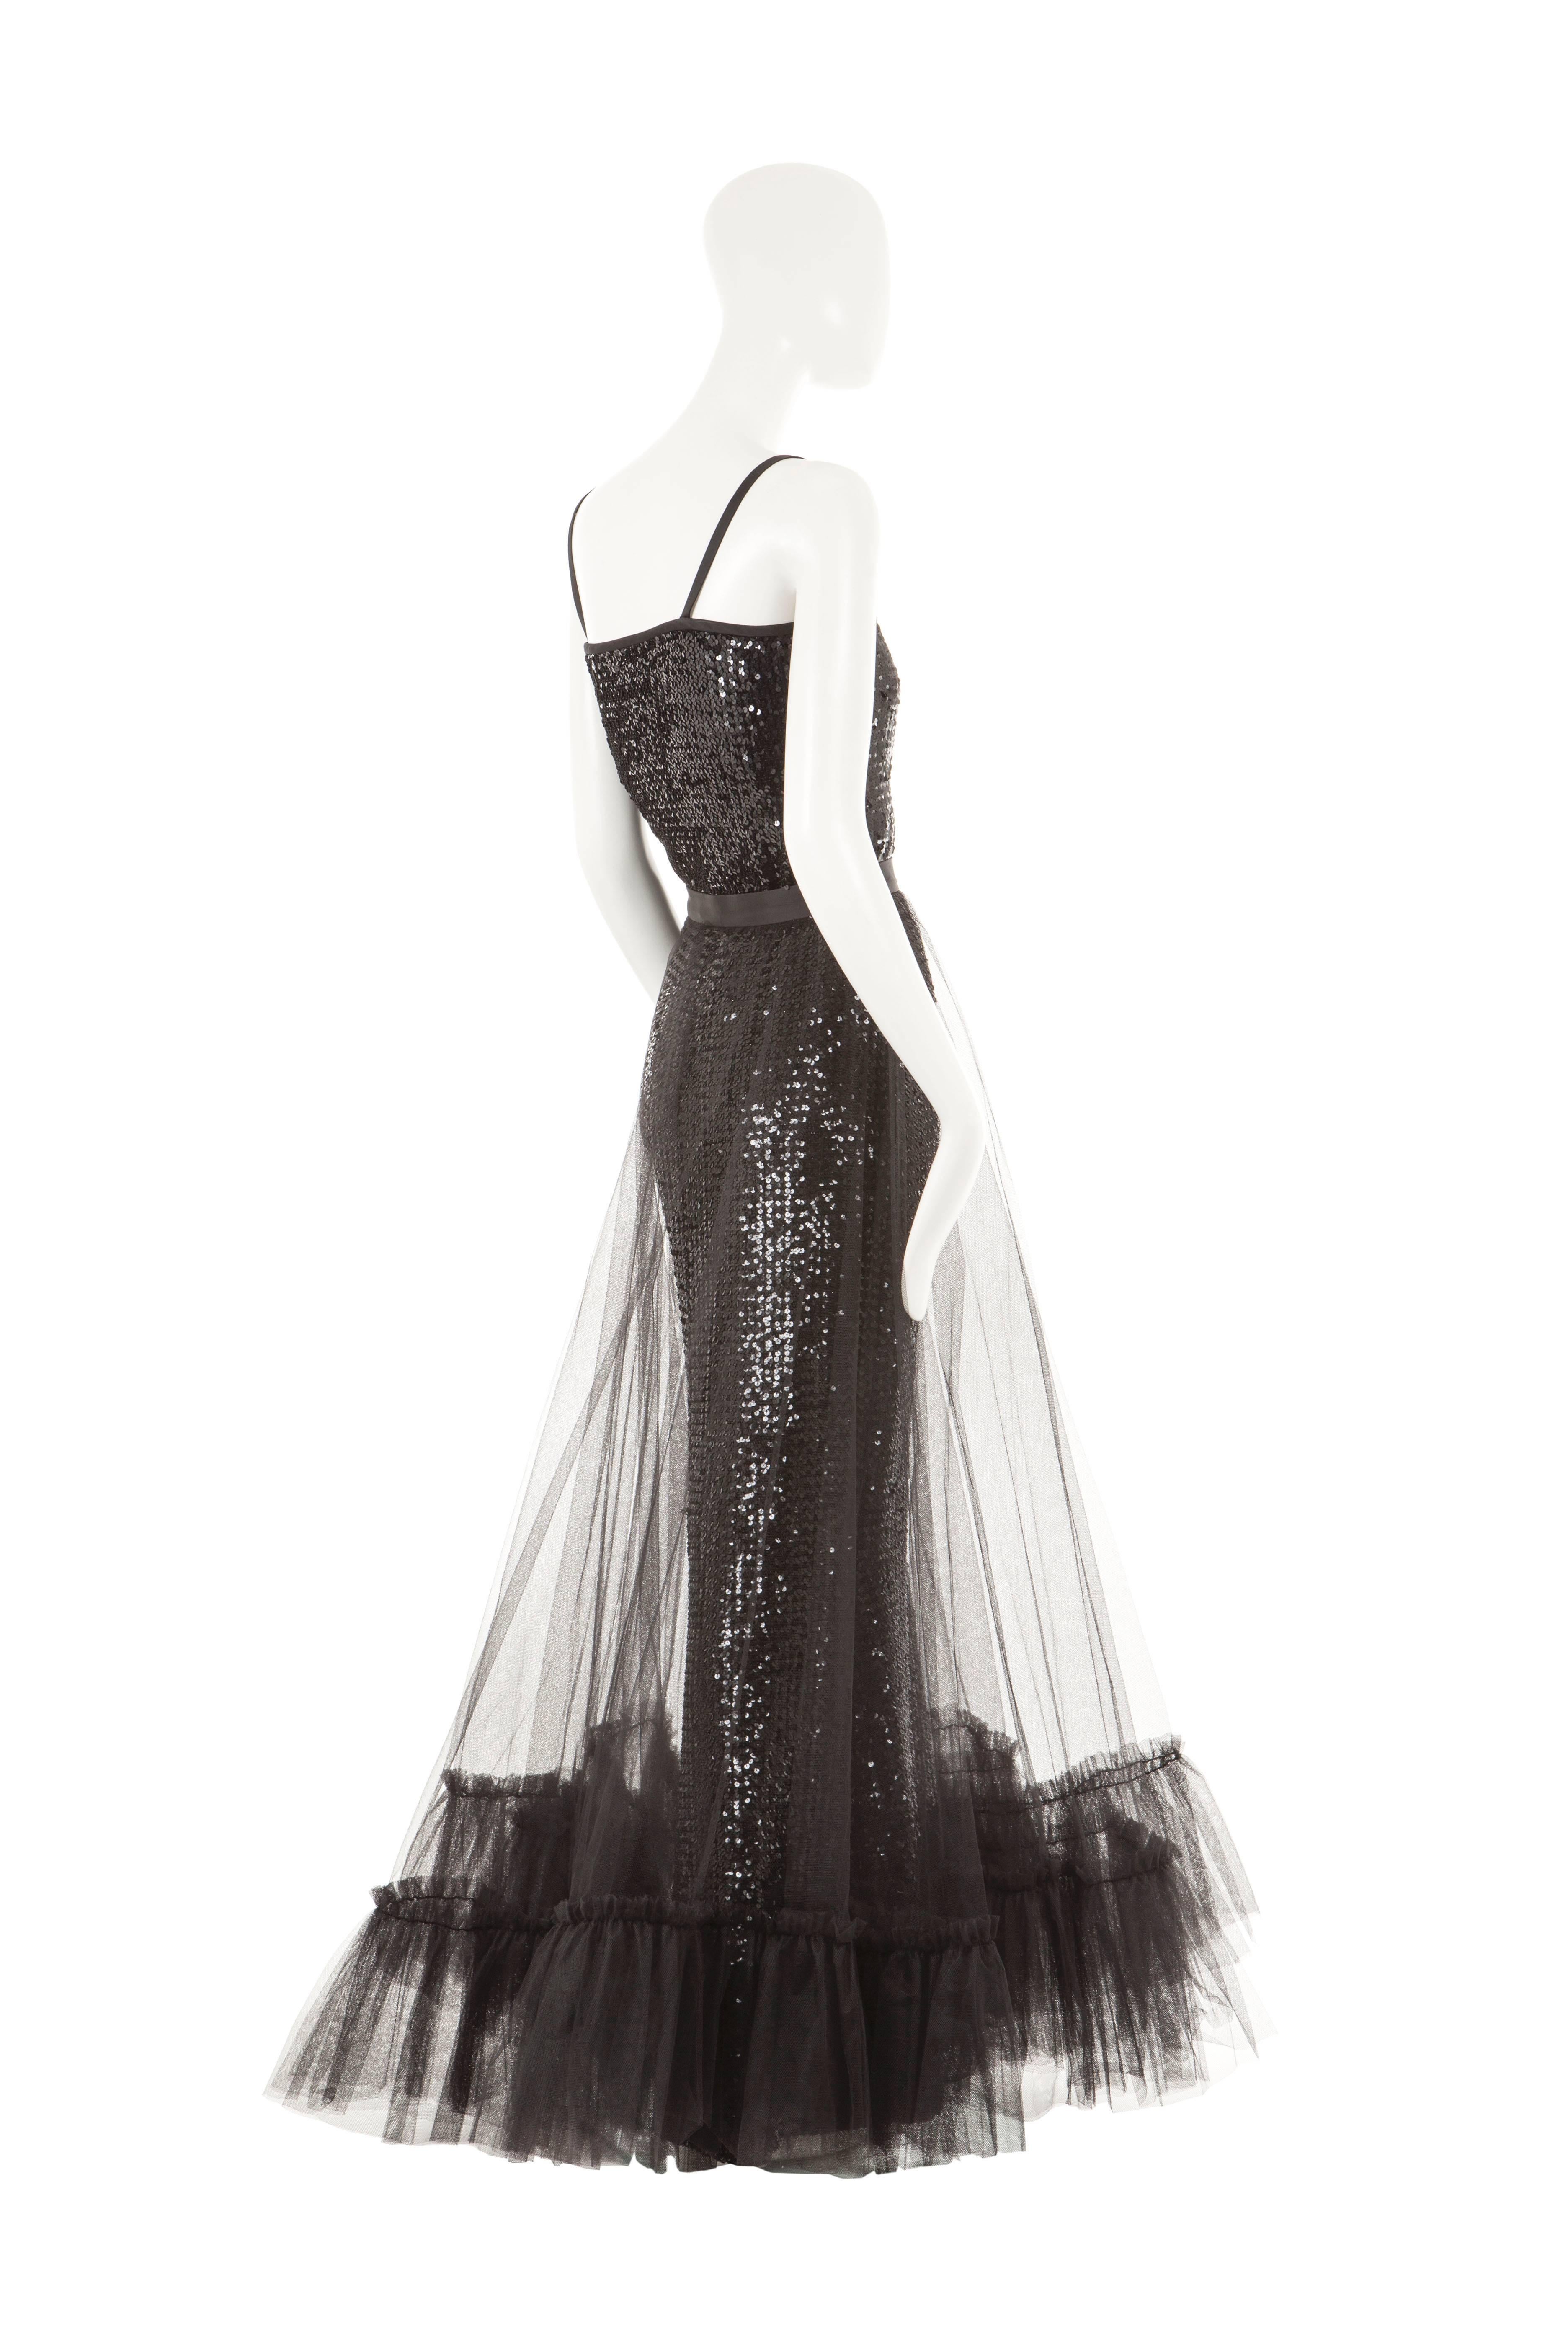 Women's Yves Saint Laurent sequin and tulle gown, 1981 For Sale